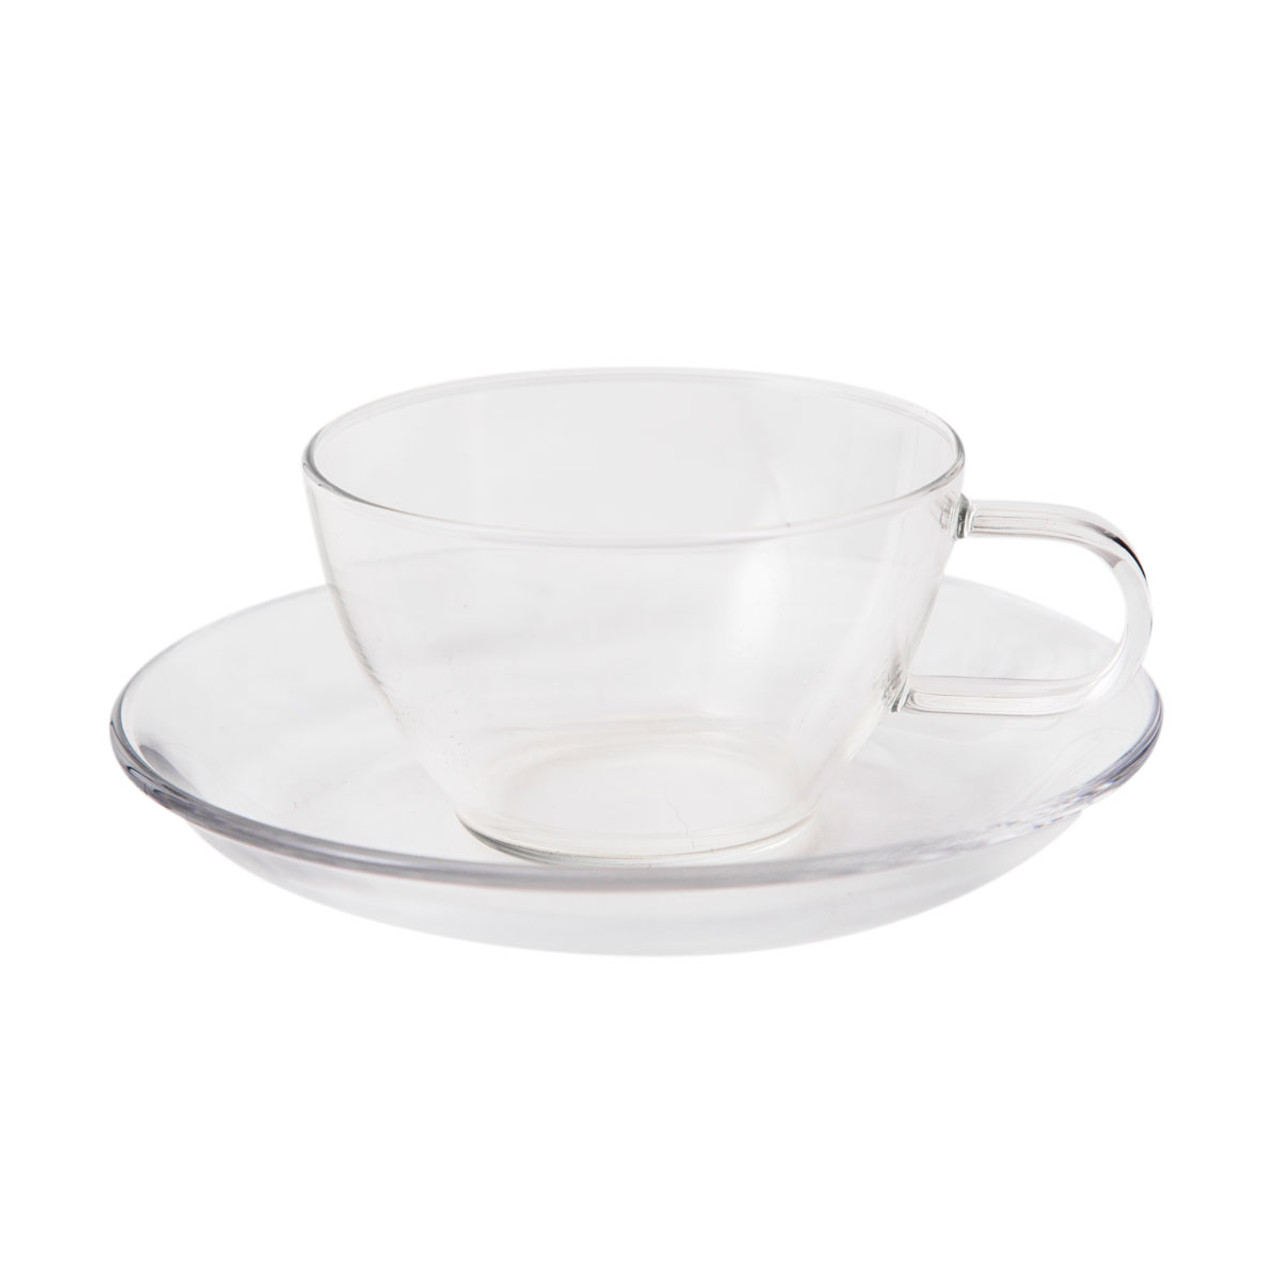 https://cdn11.bigcommerce.com/s-6h7ychjk4/images/stencil/1280x1280/products/8415/90406/hario-tscn-1t-glass-teacup-saucer__41331.1597184278.jpg?c=1